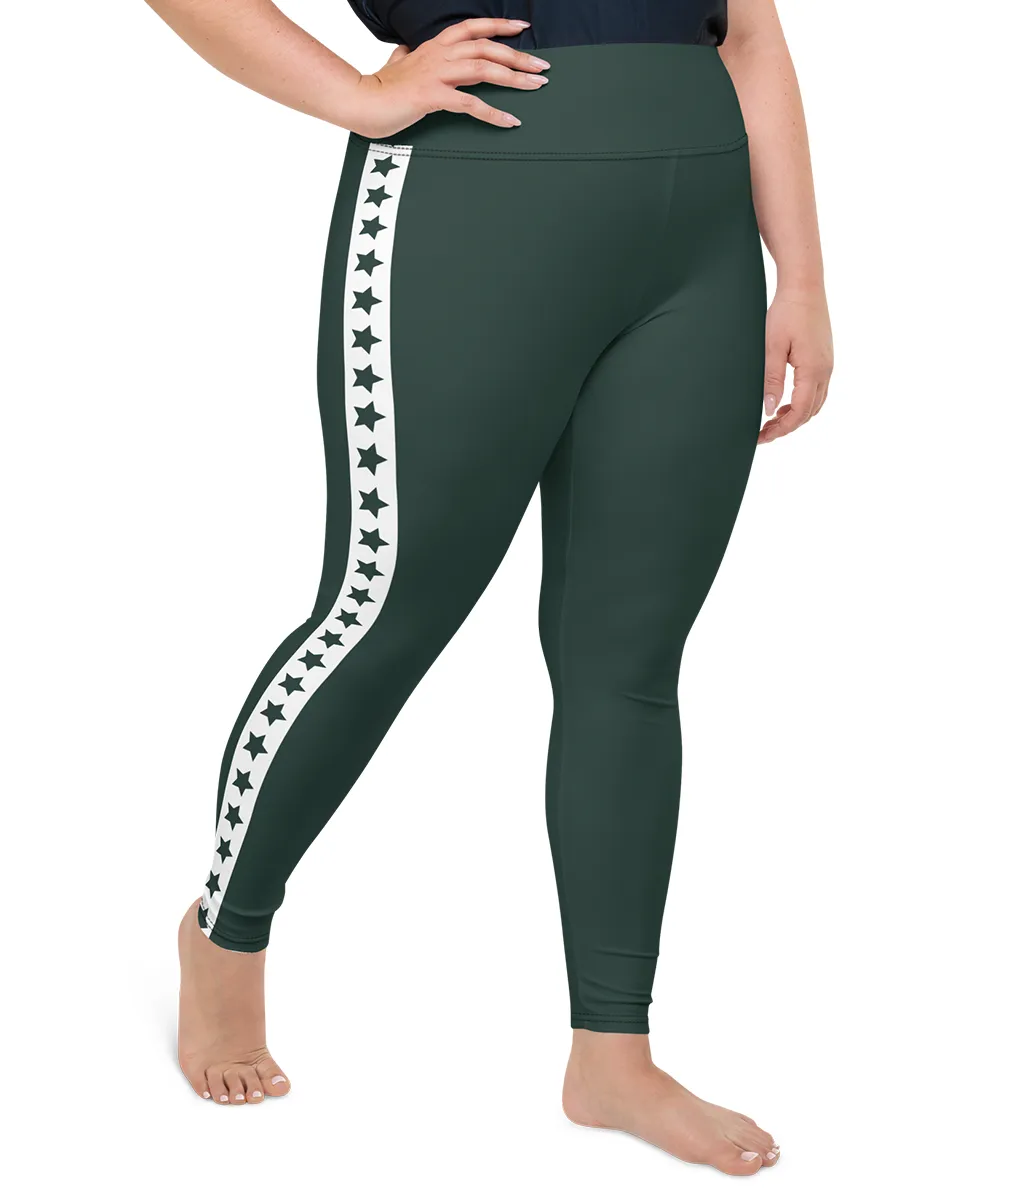 Side Stripe Star Plus Size Leggings - Designed By Squeaky Chimp T